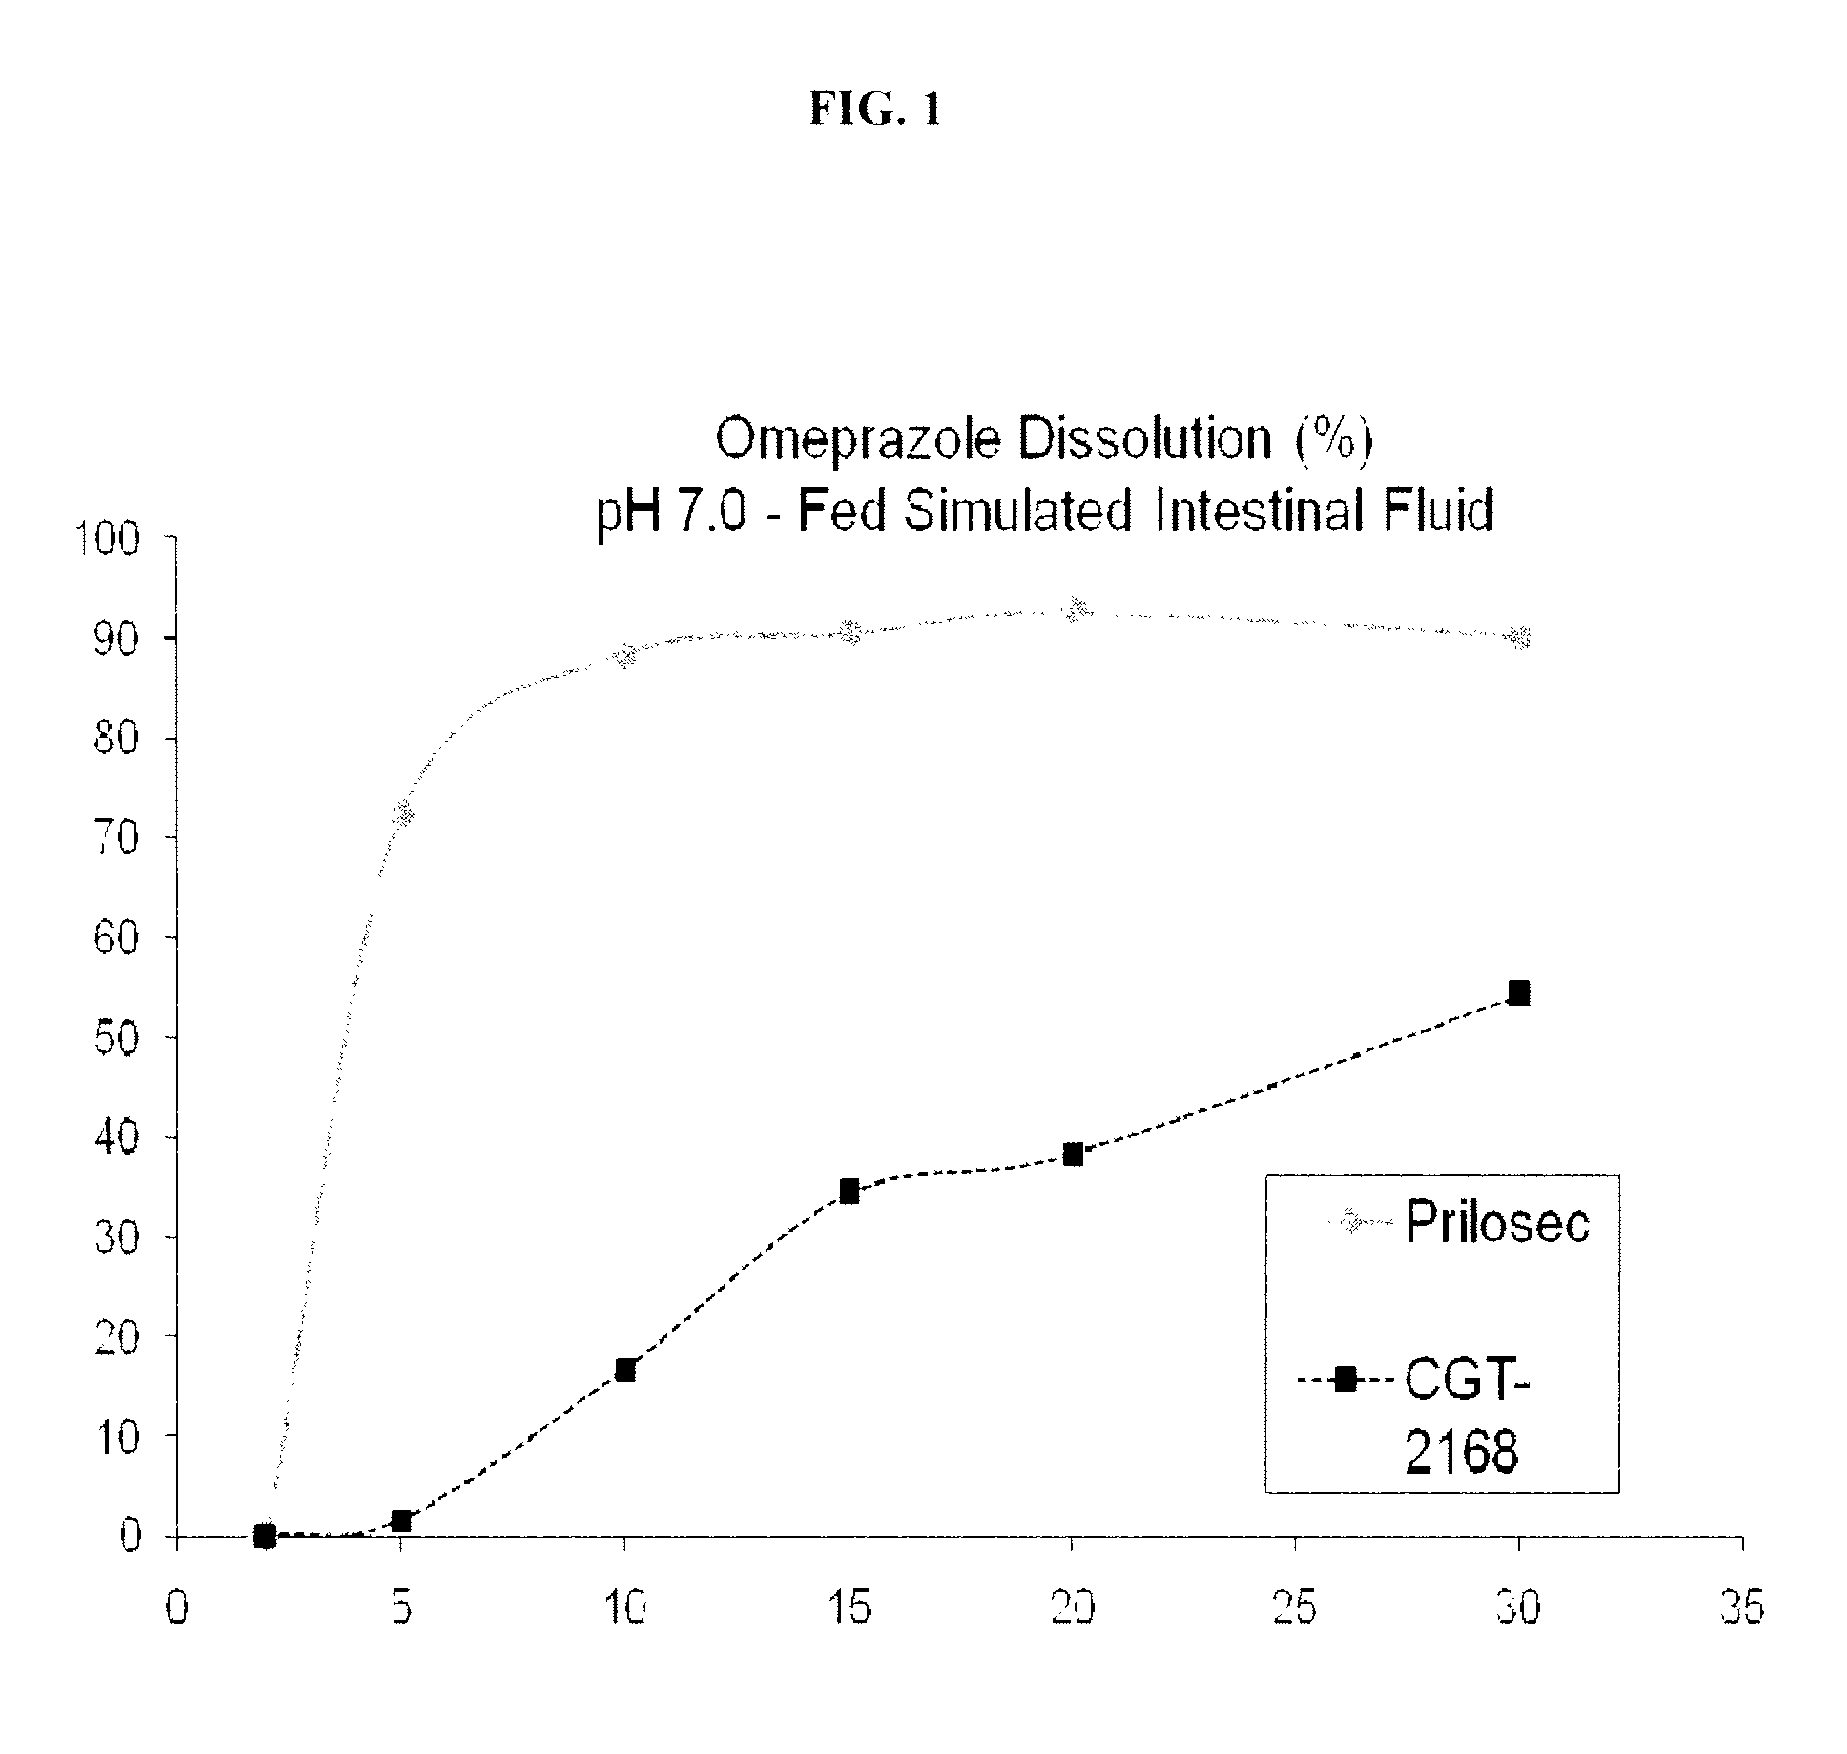 Oral dosage forms including an antiplatelet agent and an enterically coated acid inhibitor